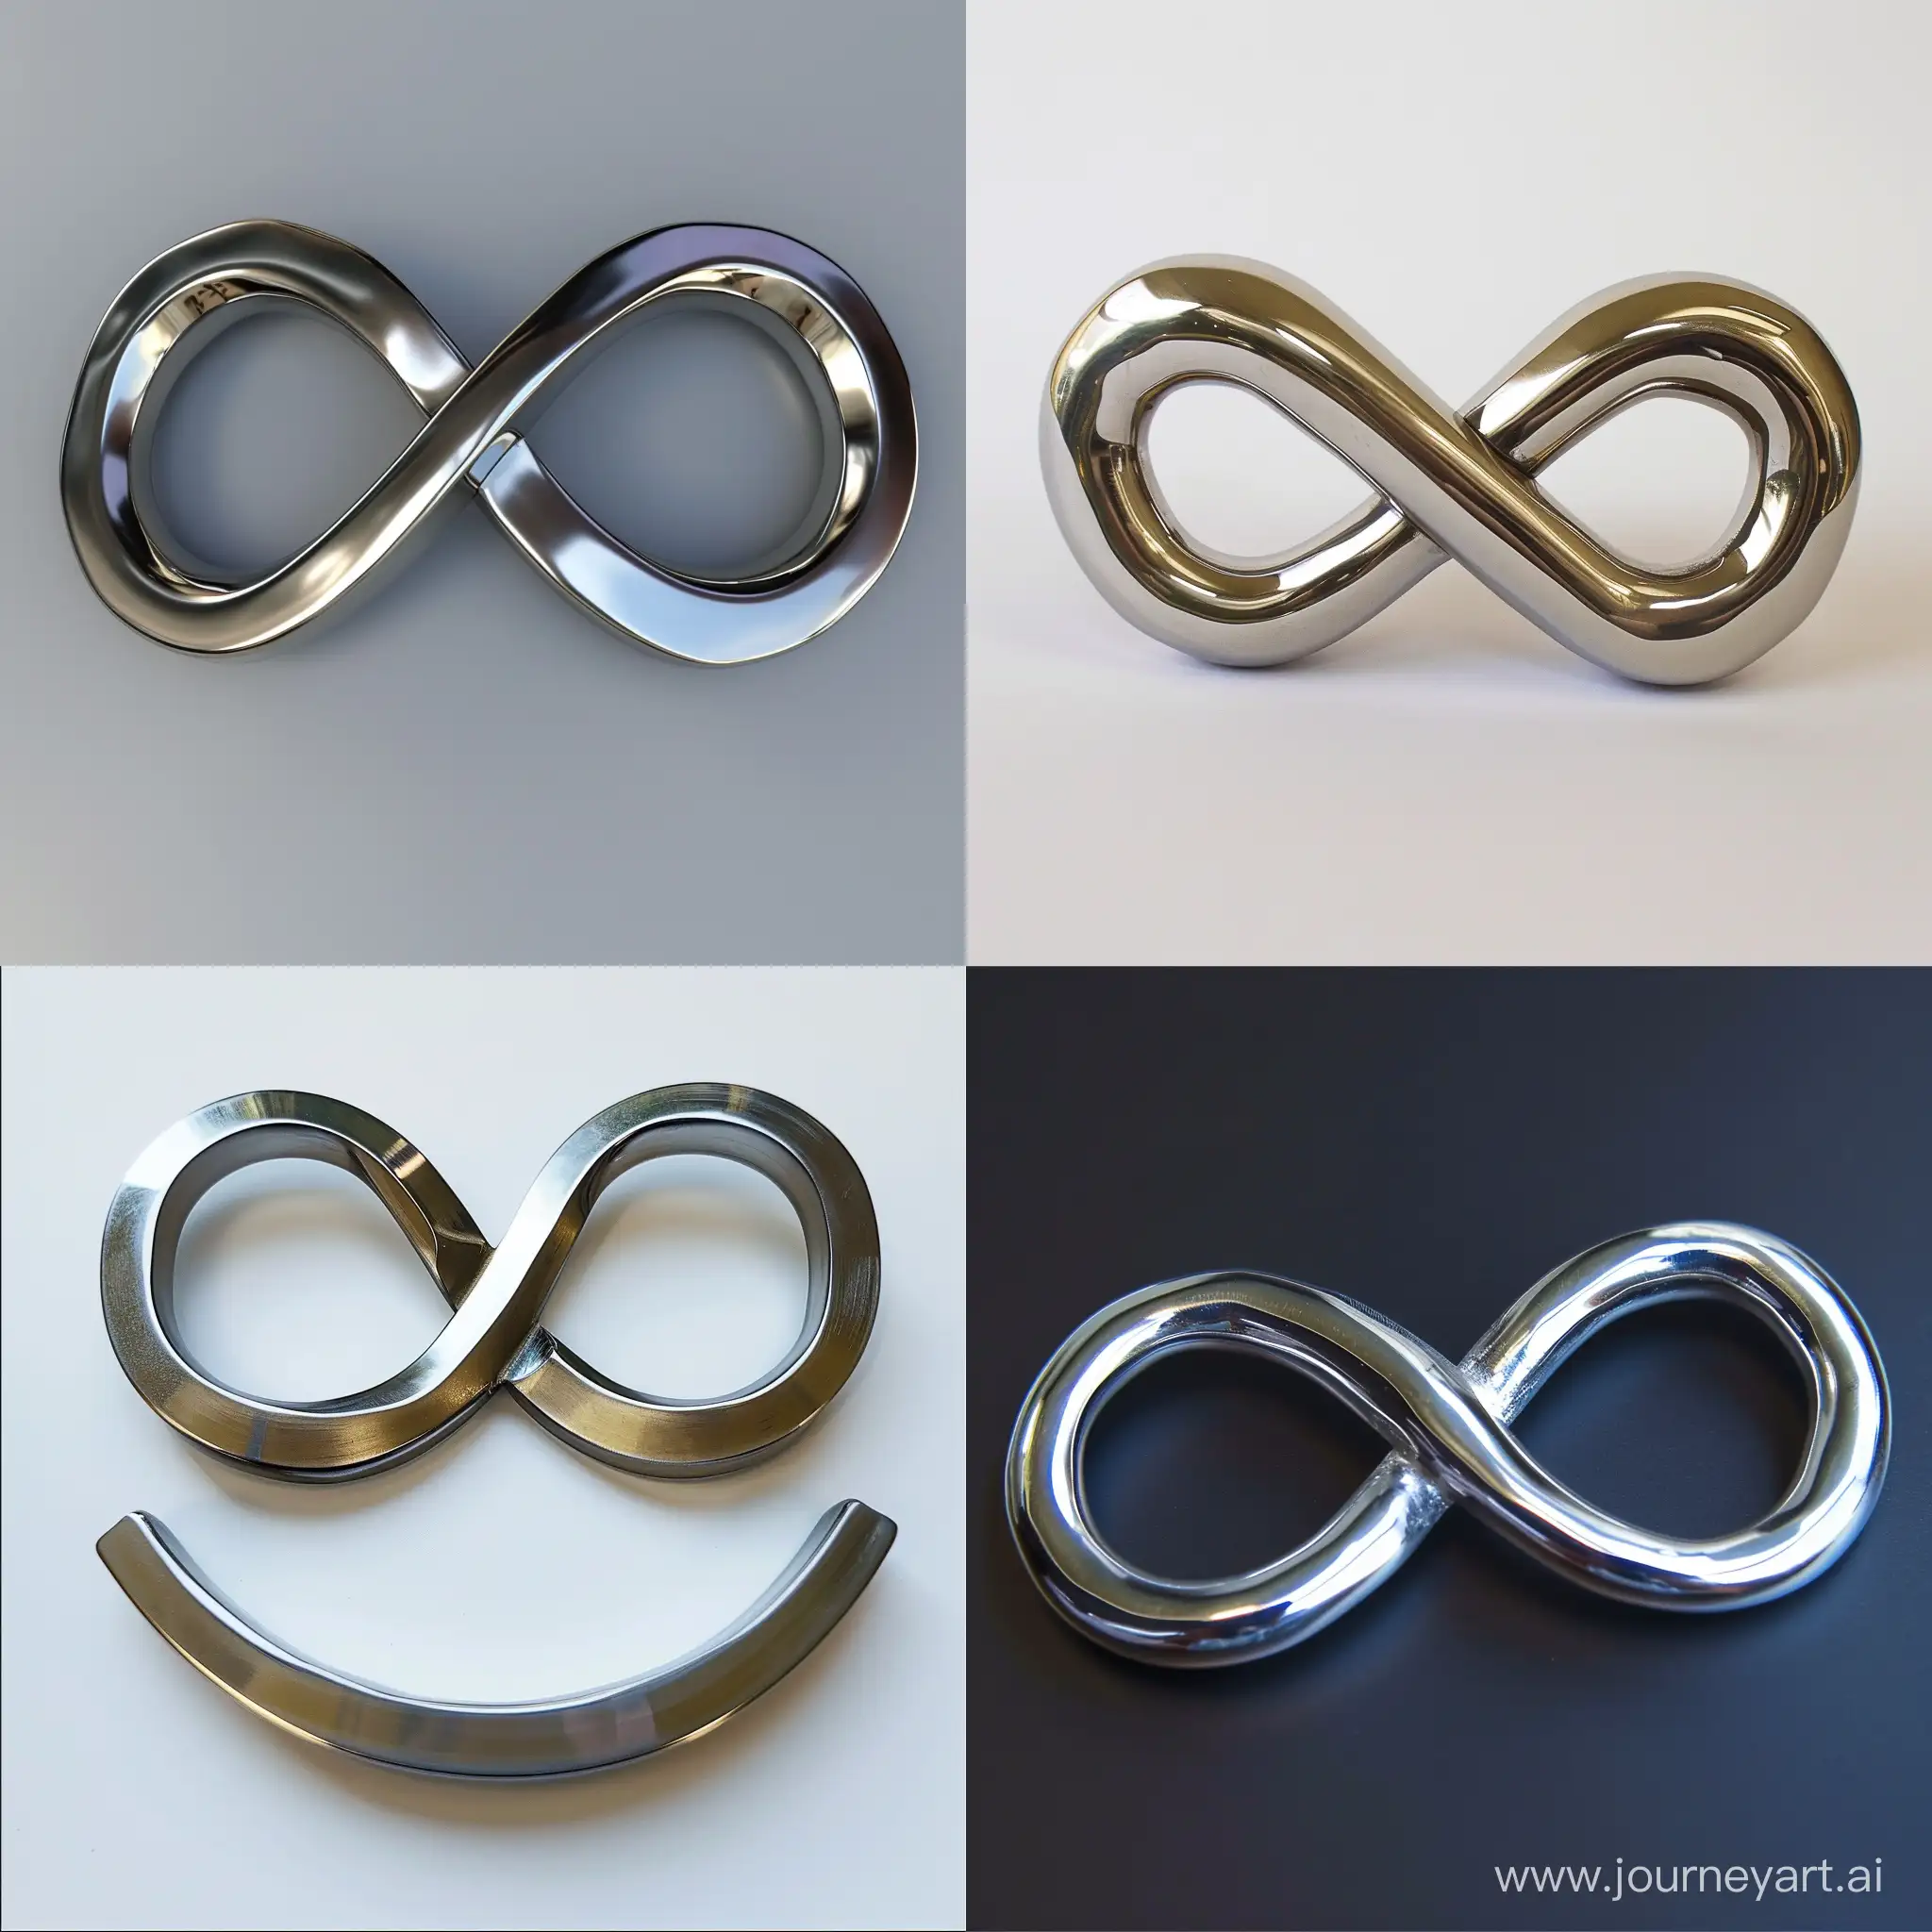 Stainless-Steel-Infinity-Symbol-Sculpture